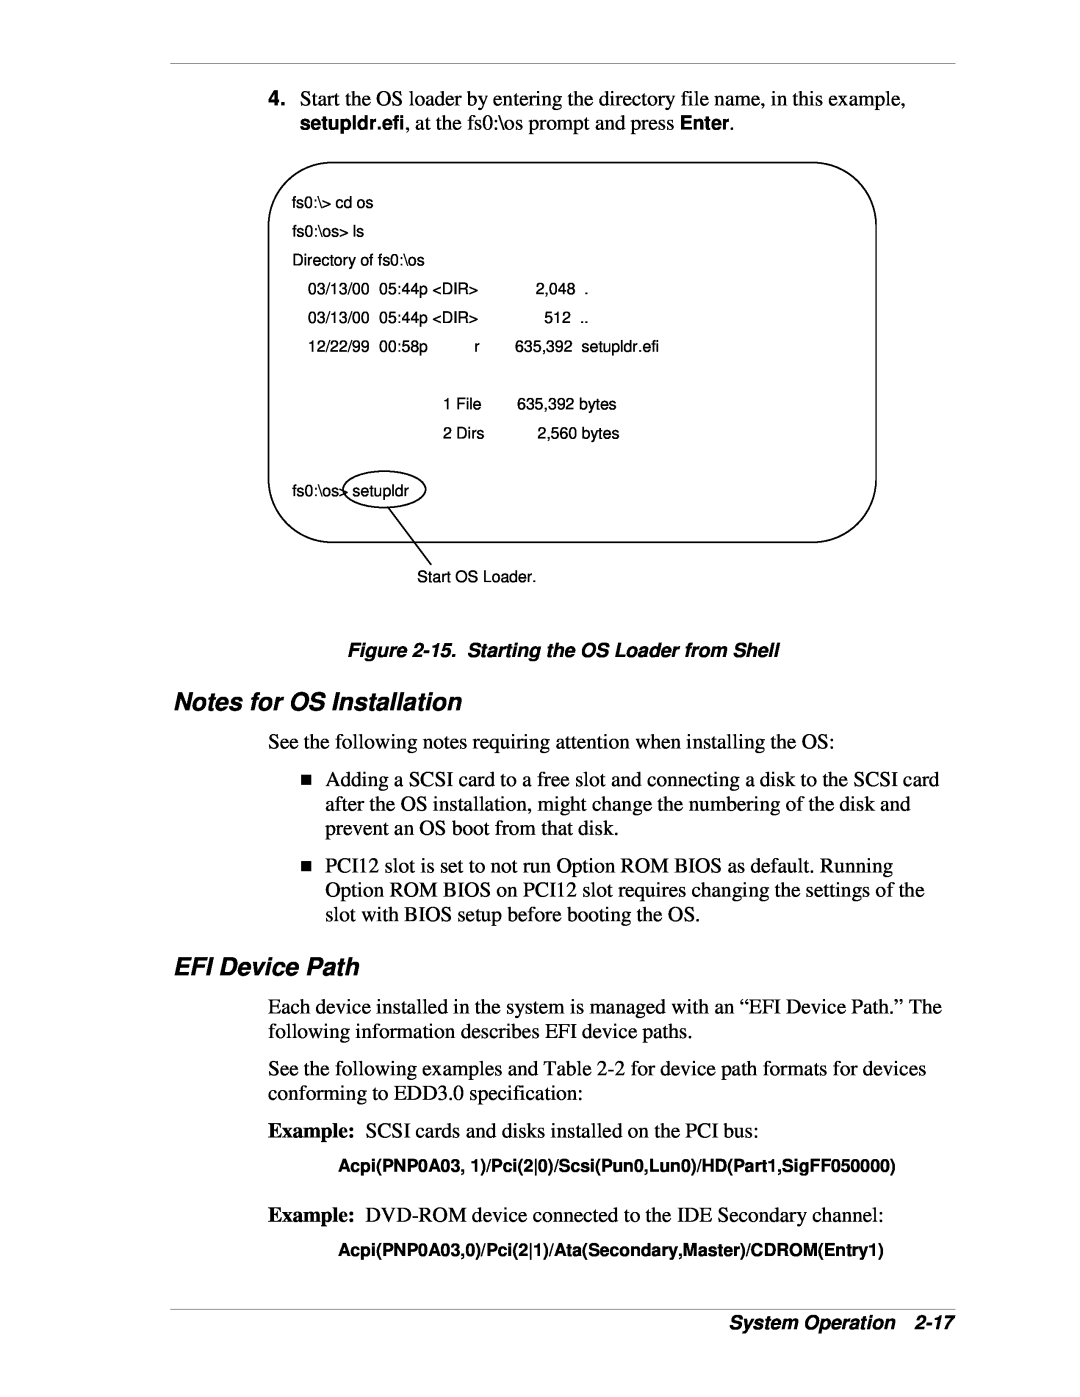 NEC 1080Xd manual Notes for OS Installation, EFI Device Path 